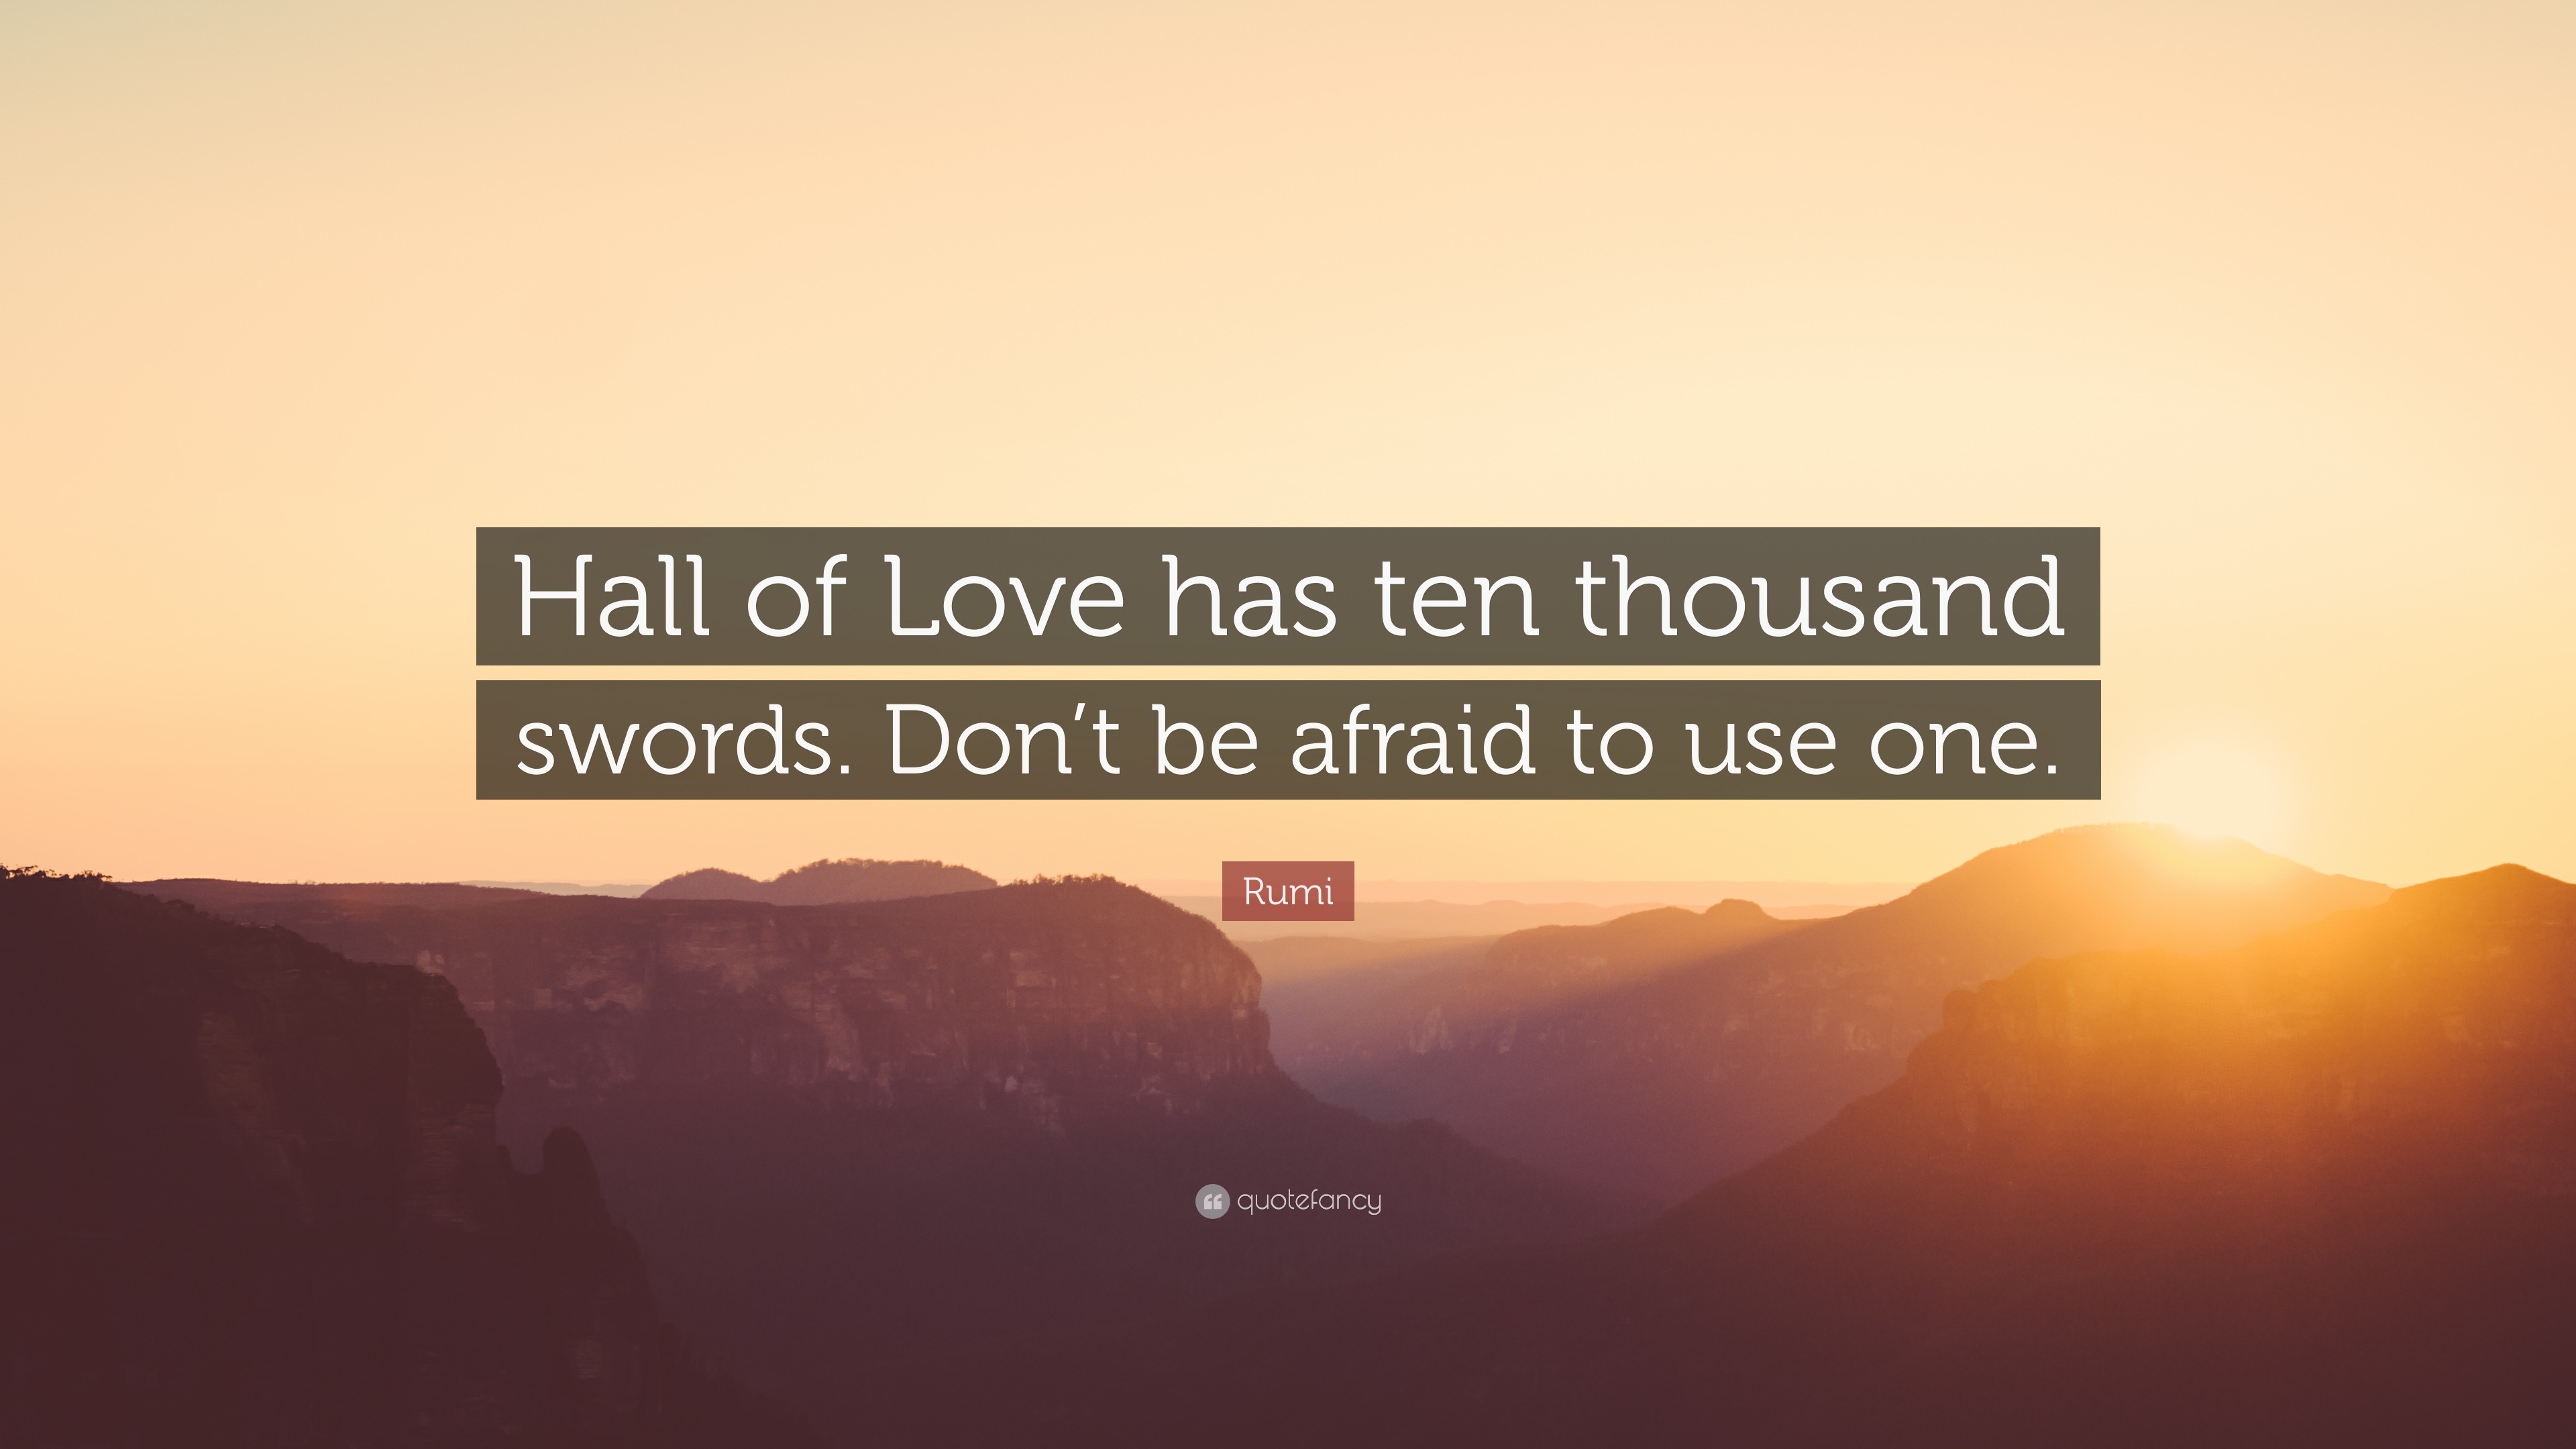 Rumi Quote “Hall of Love has ten thousand swords Don t be